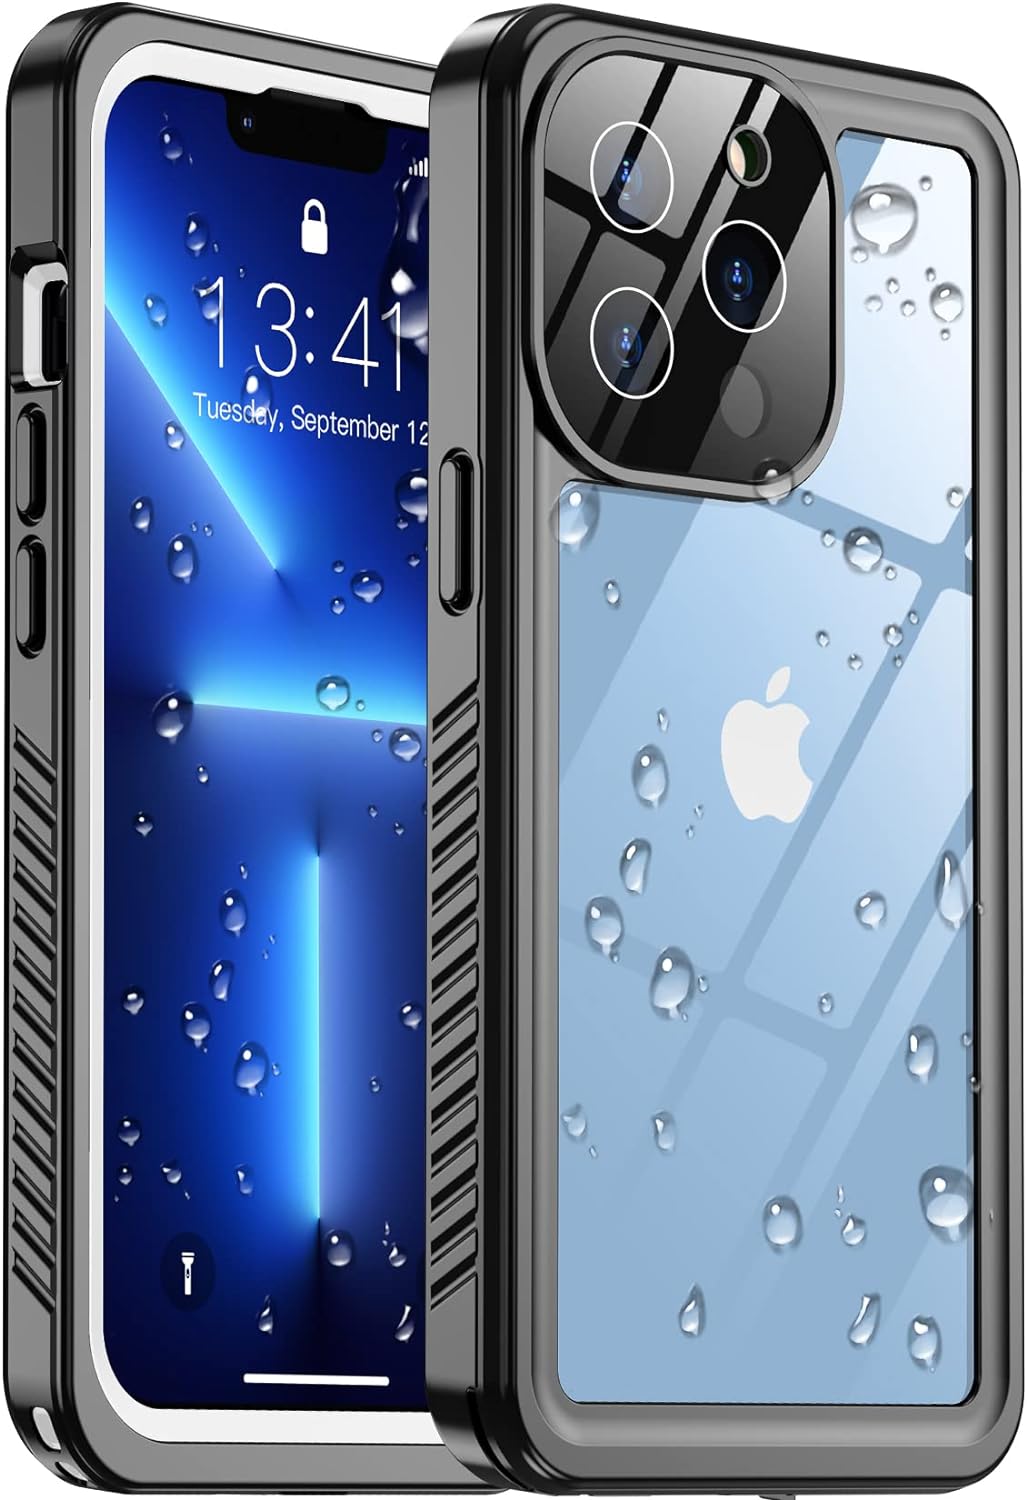 Temdan [Real 360 for iPhone 13 Pro Max Case Built-in 9H Tempered Glass Camera Lens & Screen Protection [13FTMilitary Dropproof][Full-Body Shockproof][IP68 Underwater] White